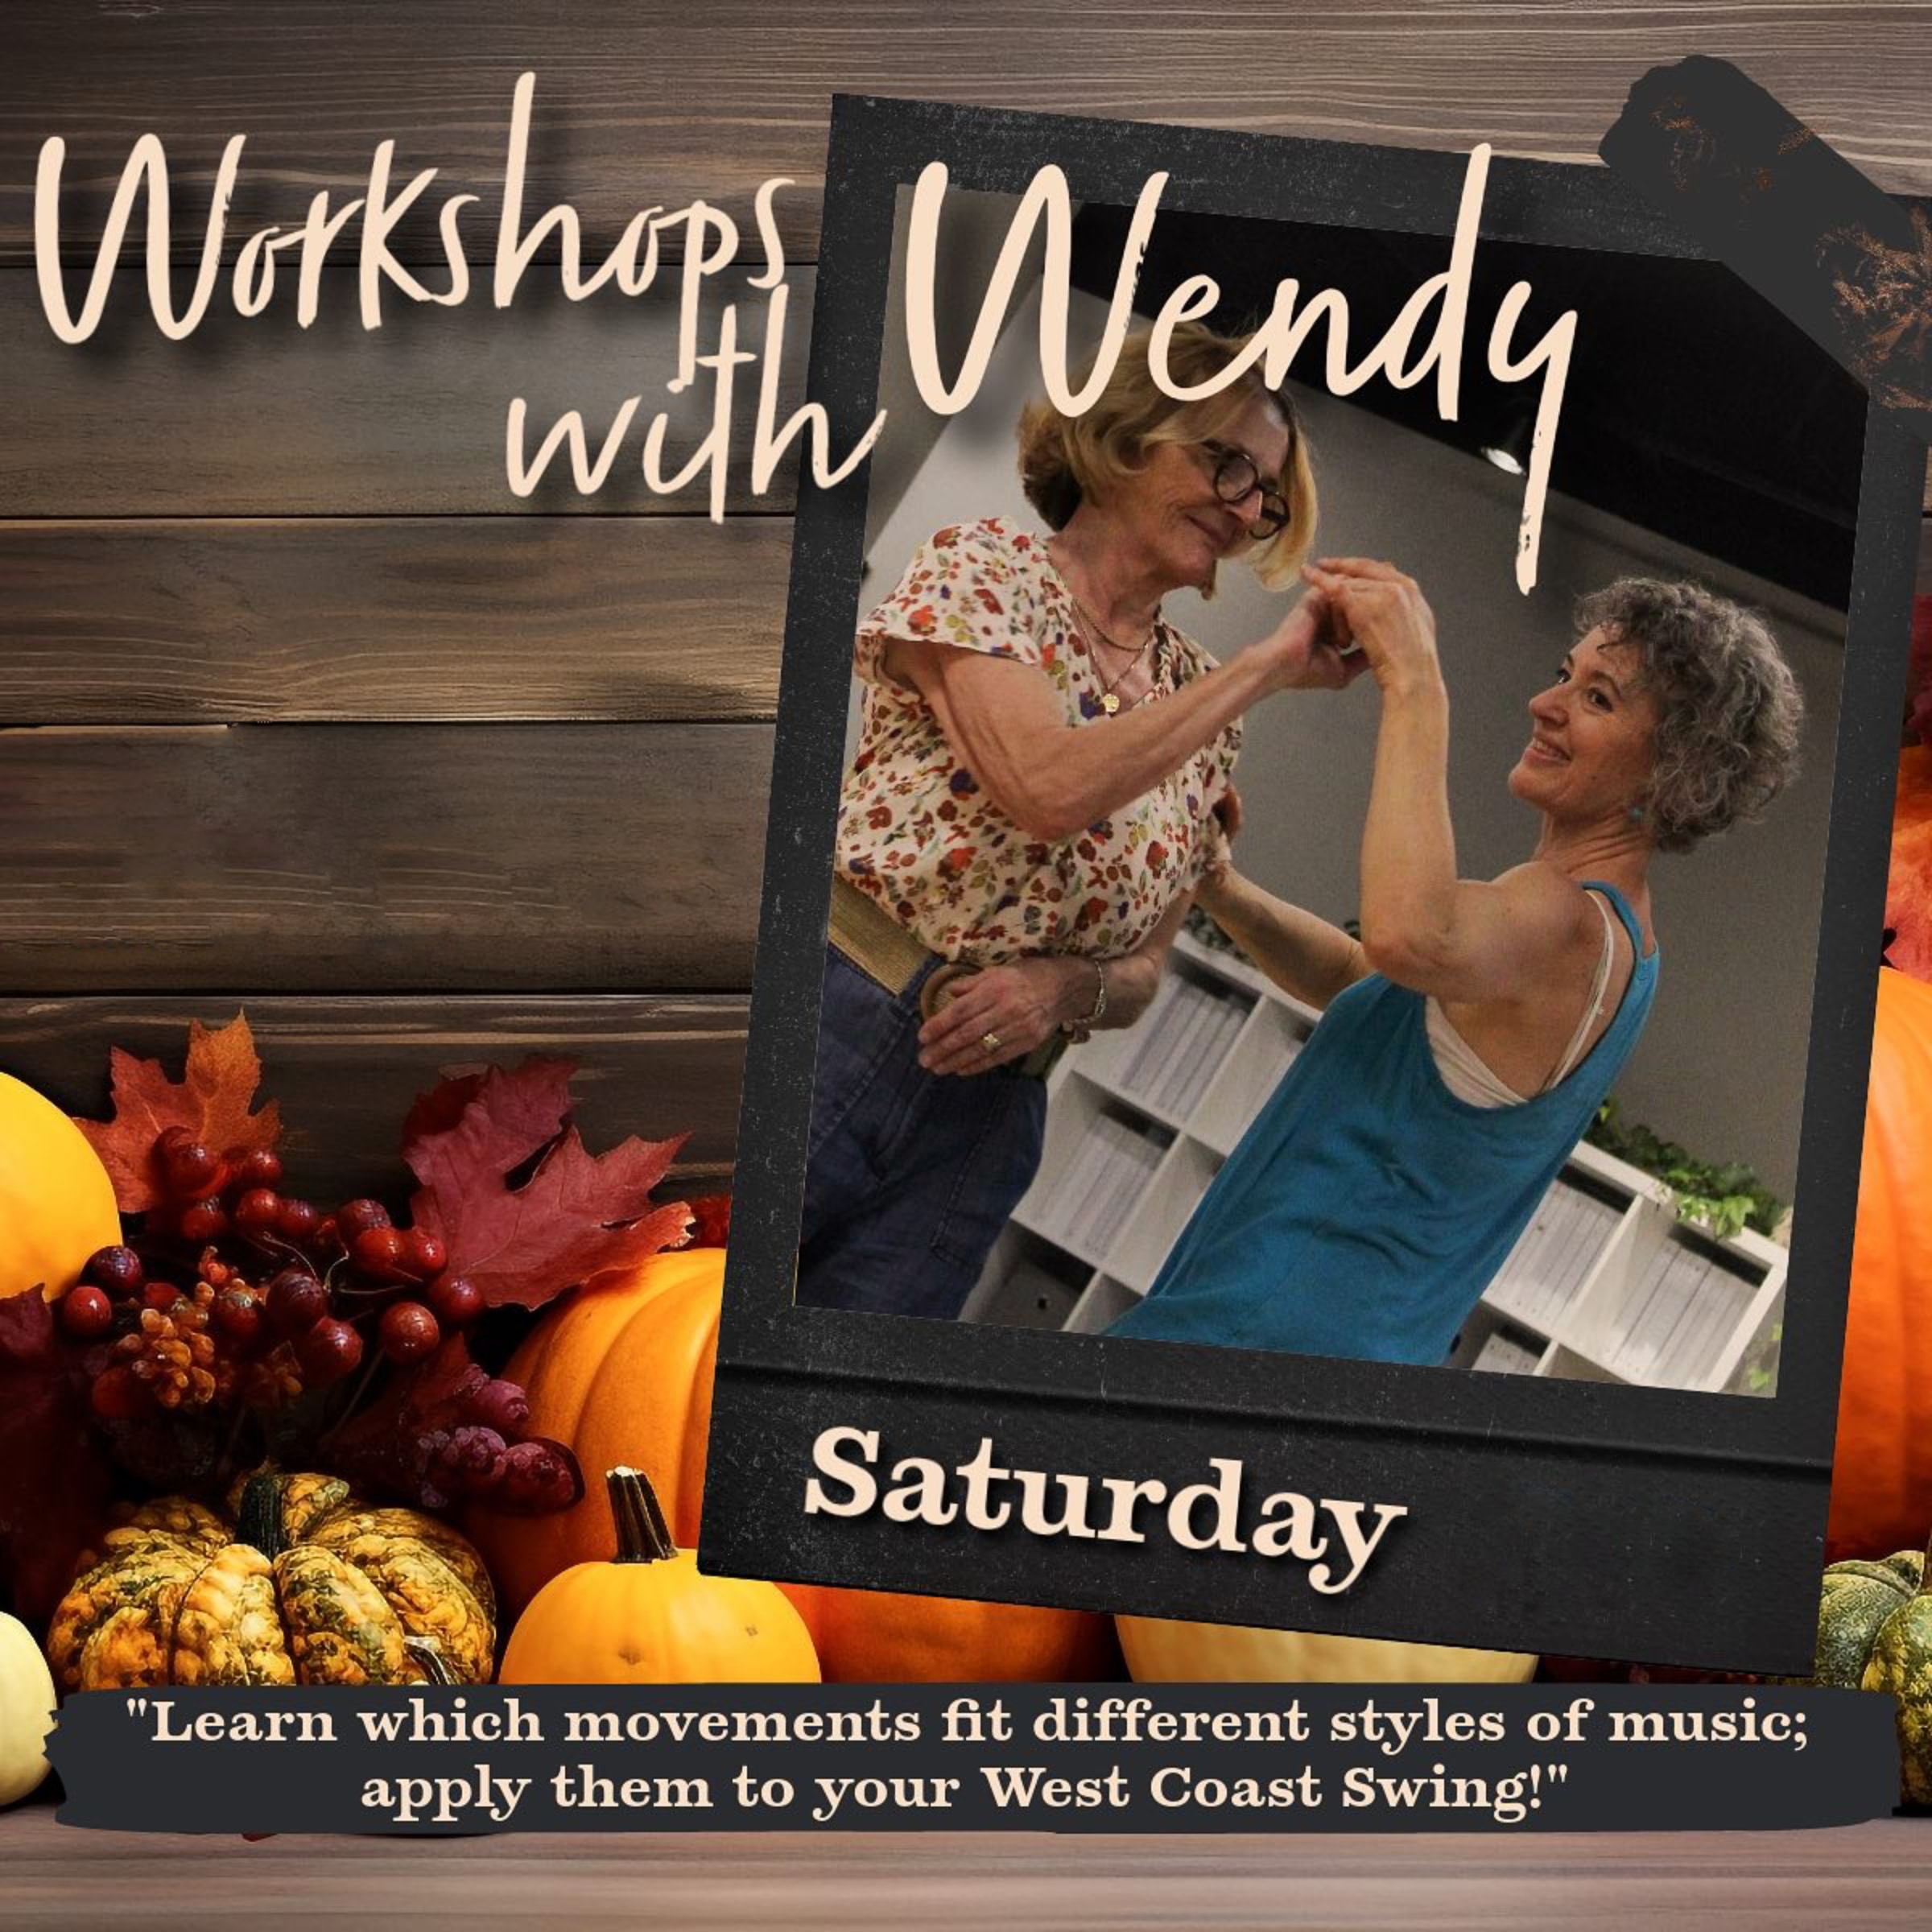 Workshops with Wendy